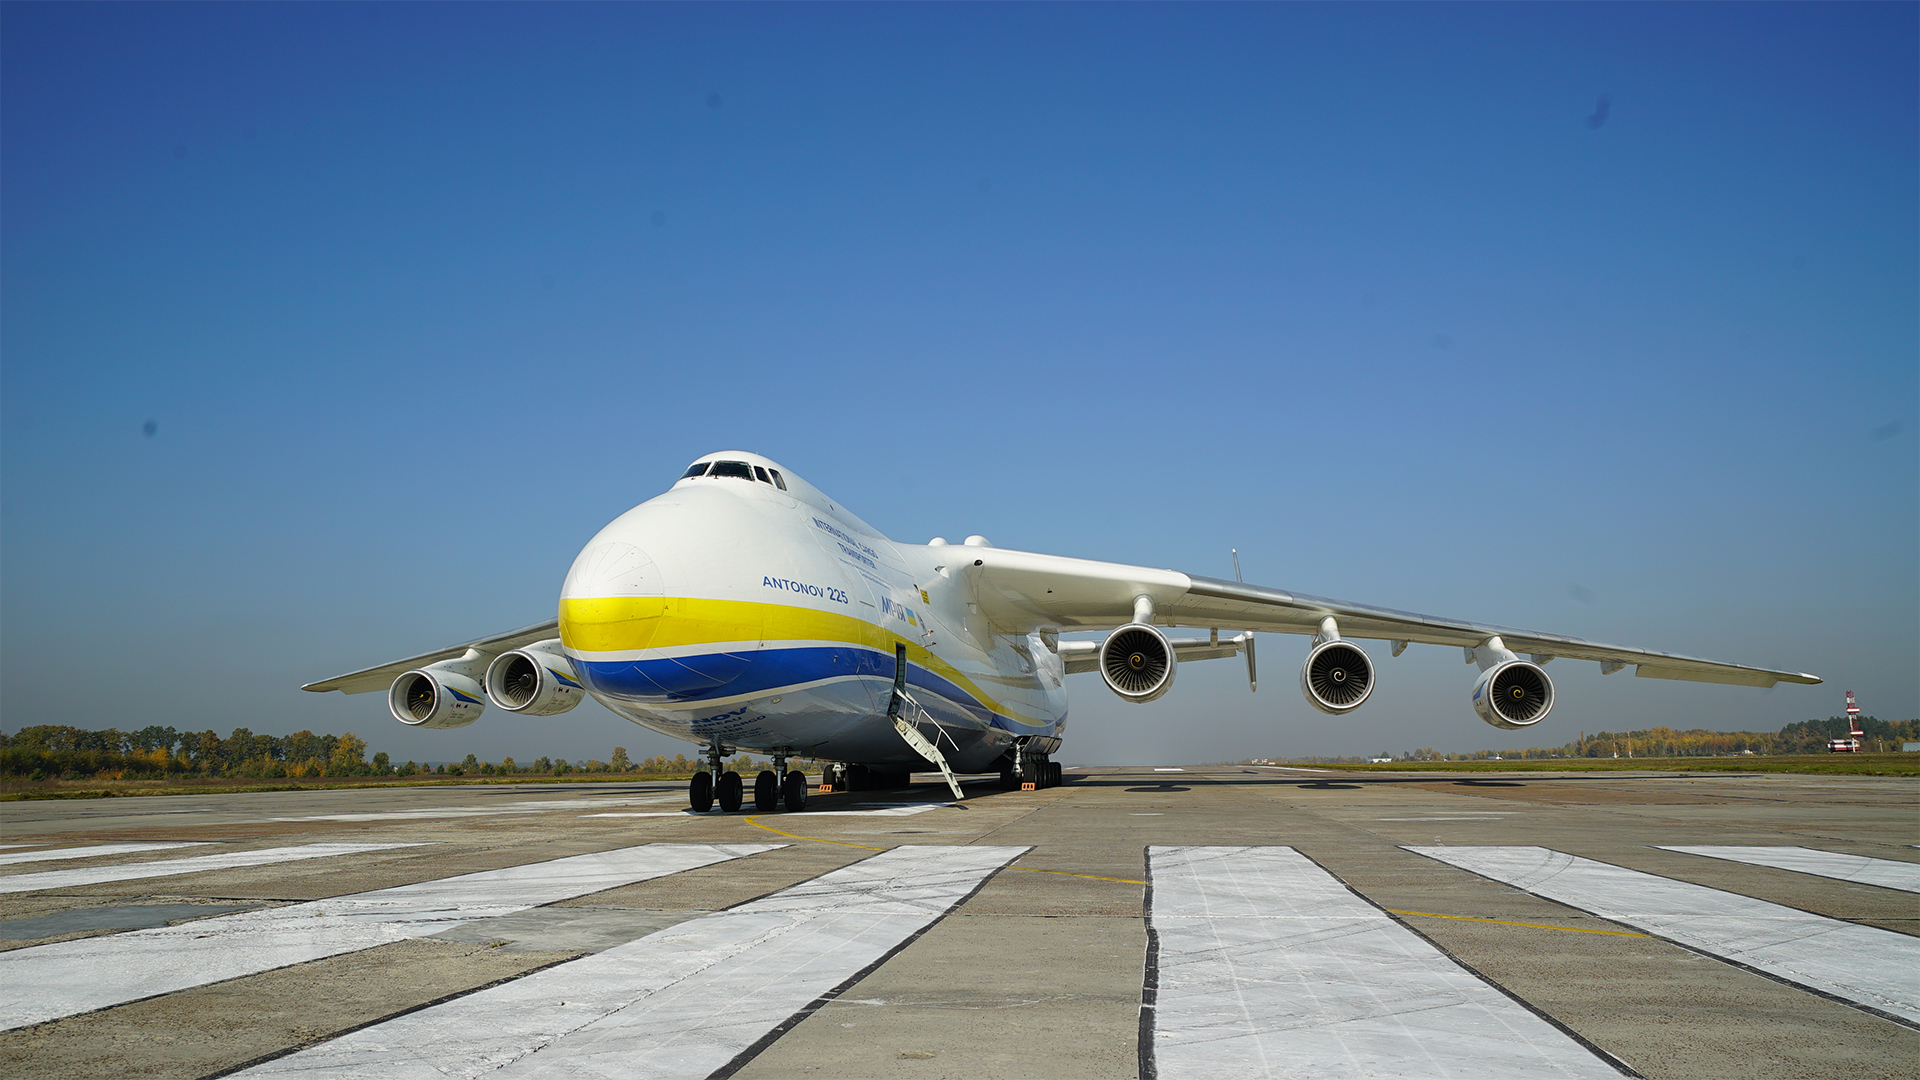 Ukraine - The Antonov Plane. This is from Abandoned Engineering. [Photo of the day - April 2022]